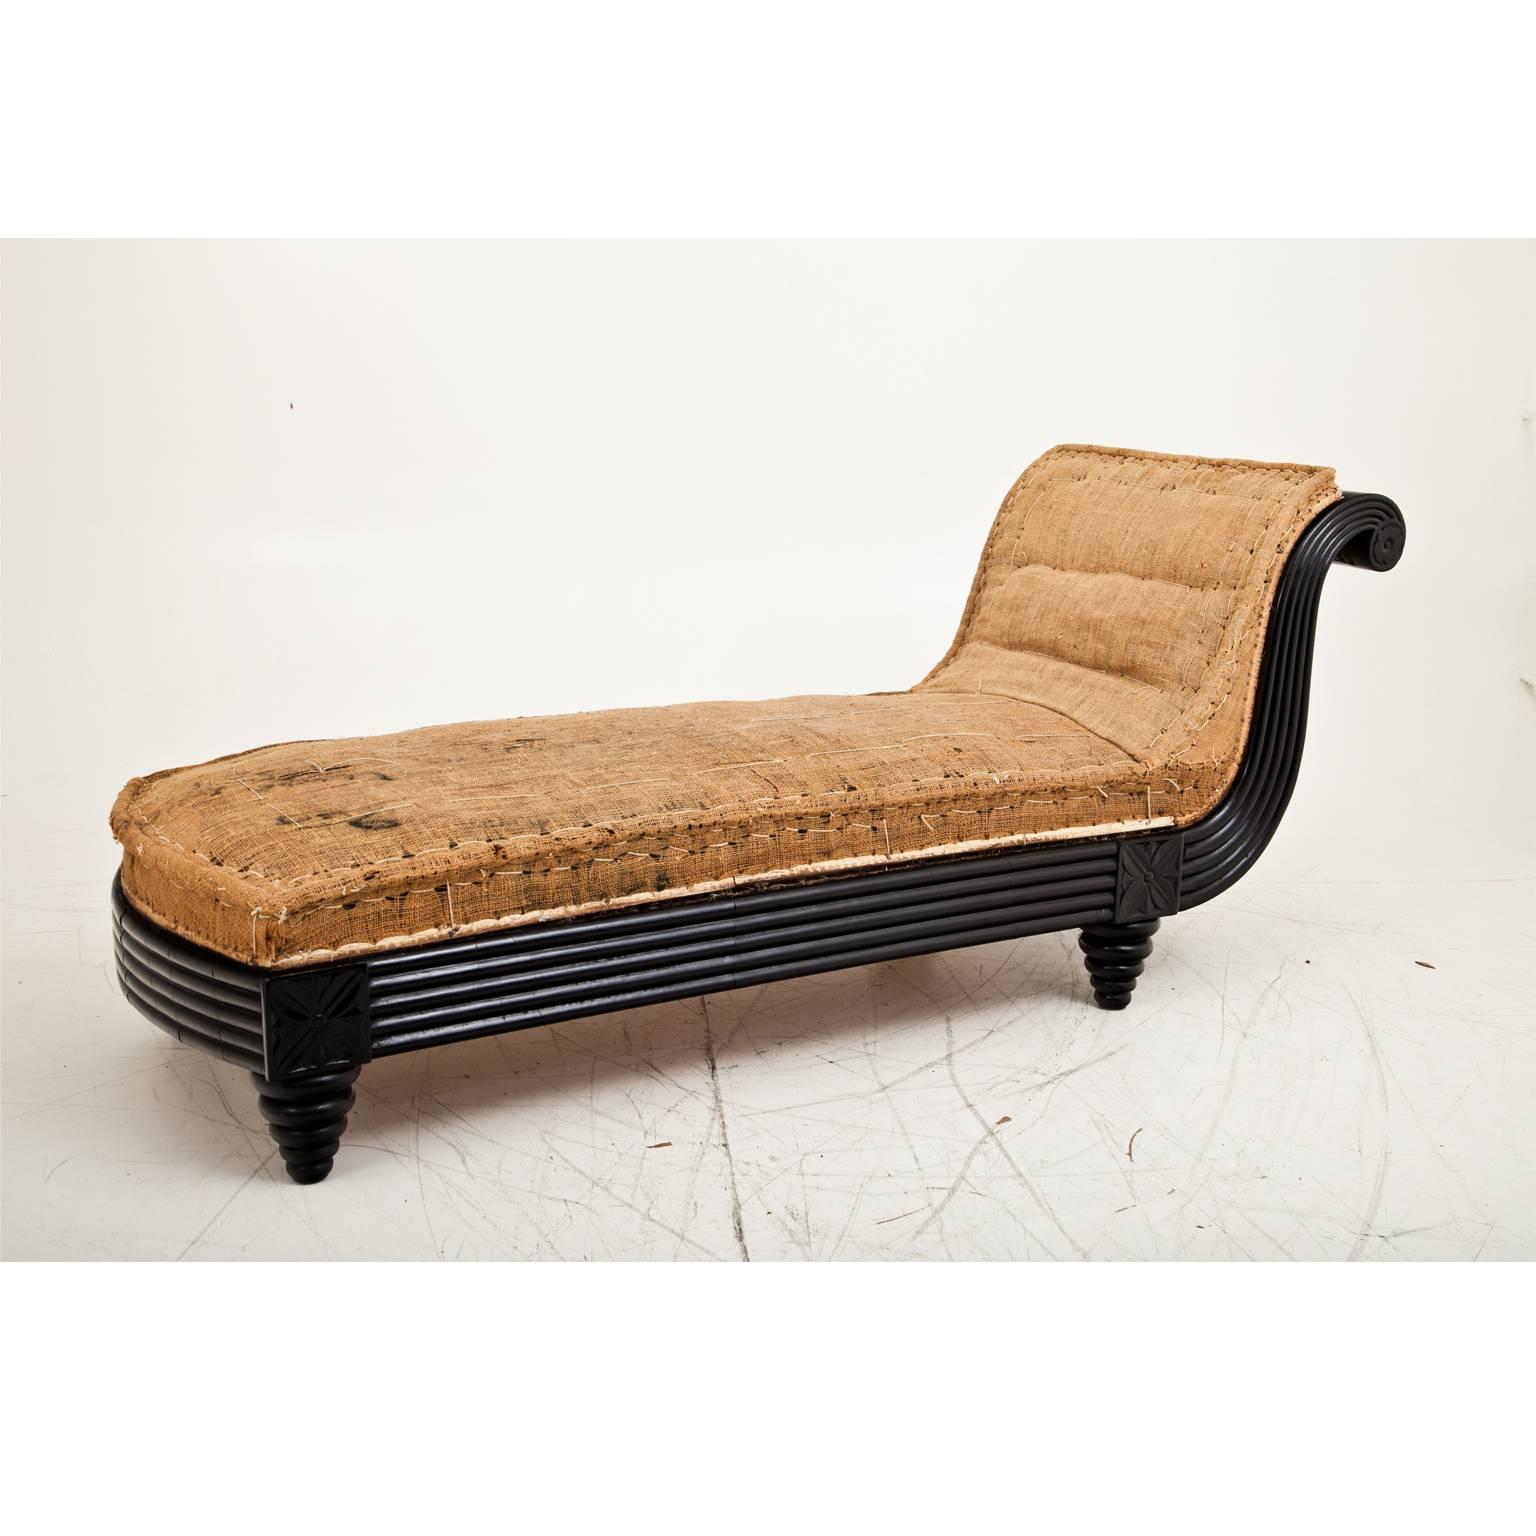 Very beautiful Italian chaise longue on cone-shaped legs, with an all-over fluted frame. The recliner is in an original condition, the legs haven been restored.